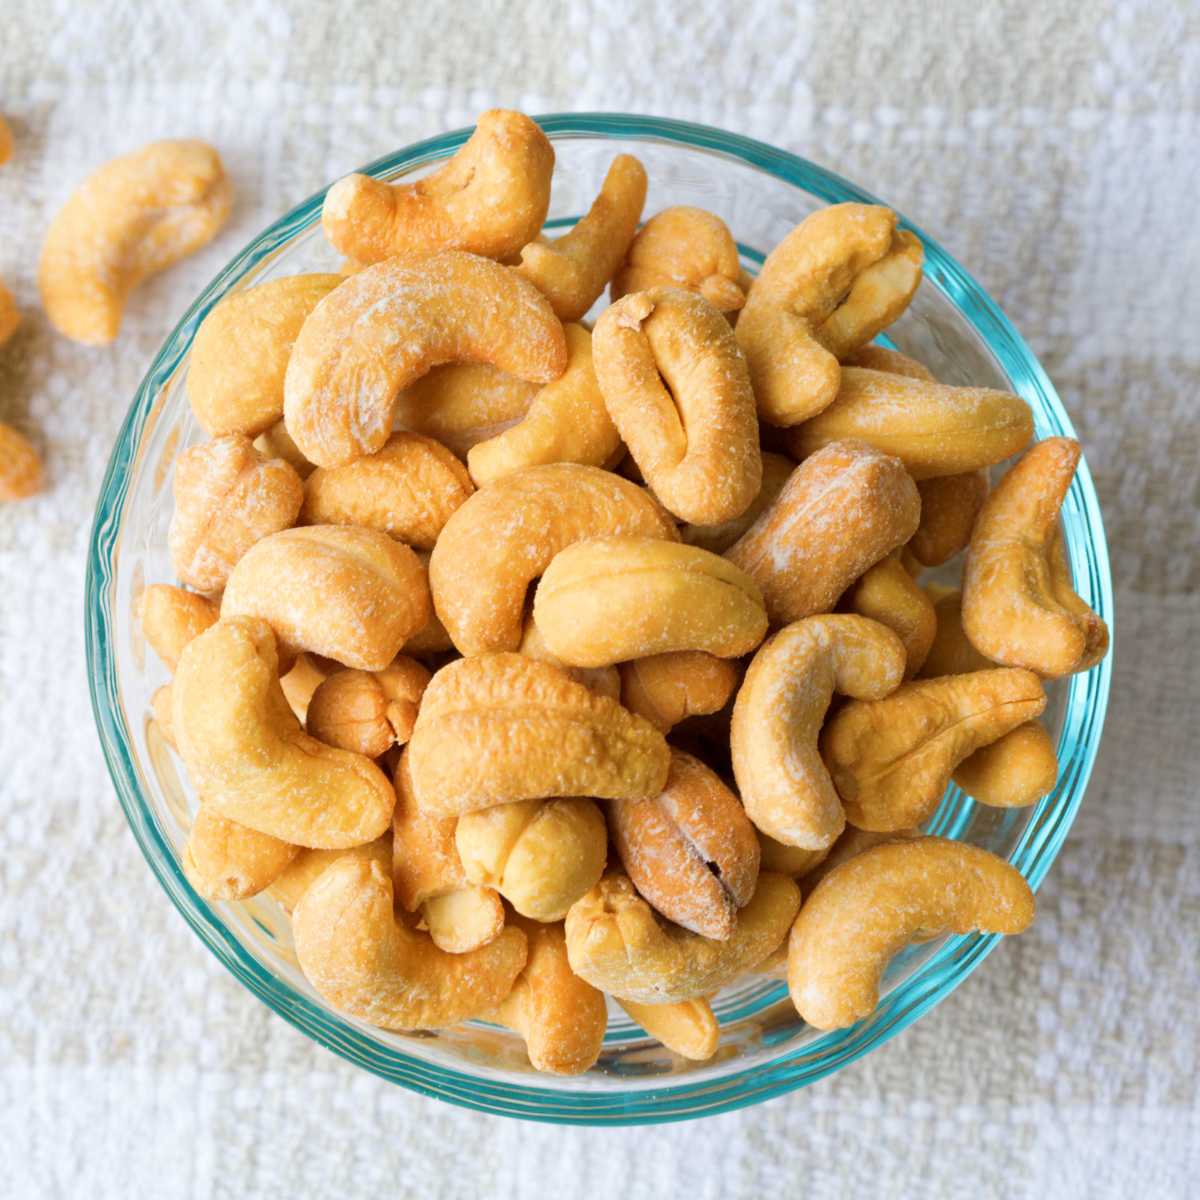 Roasted cashews in a bowl.